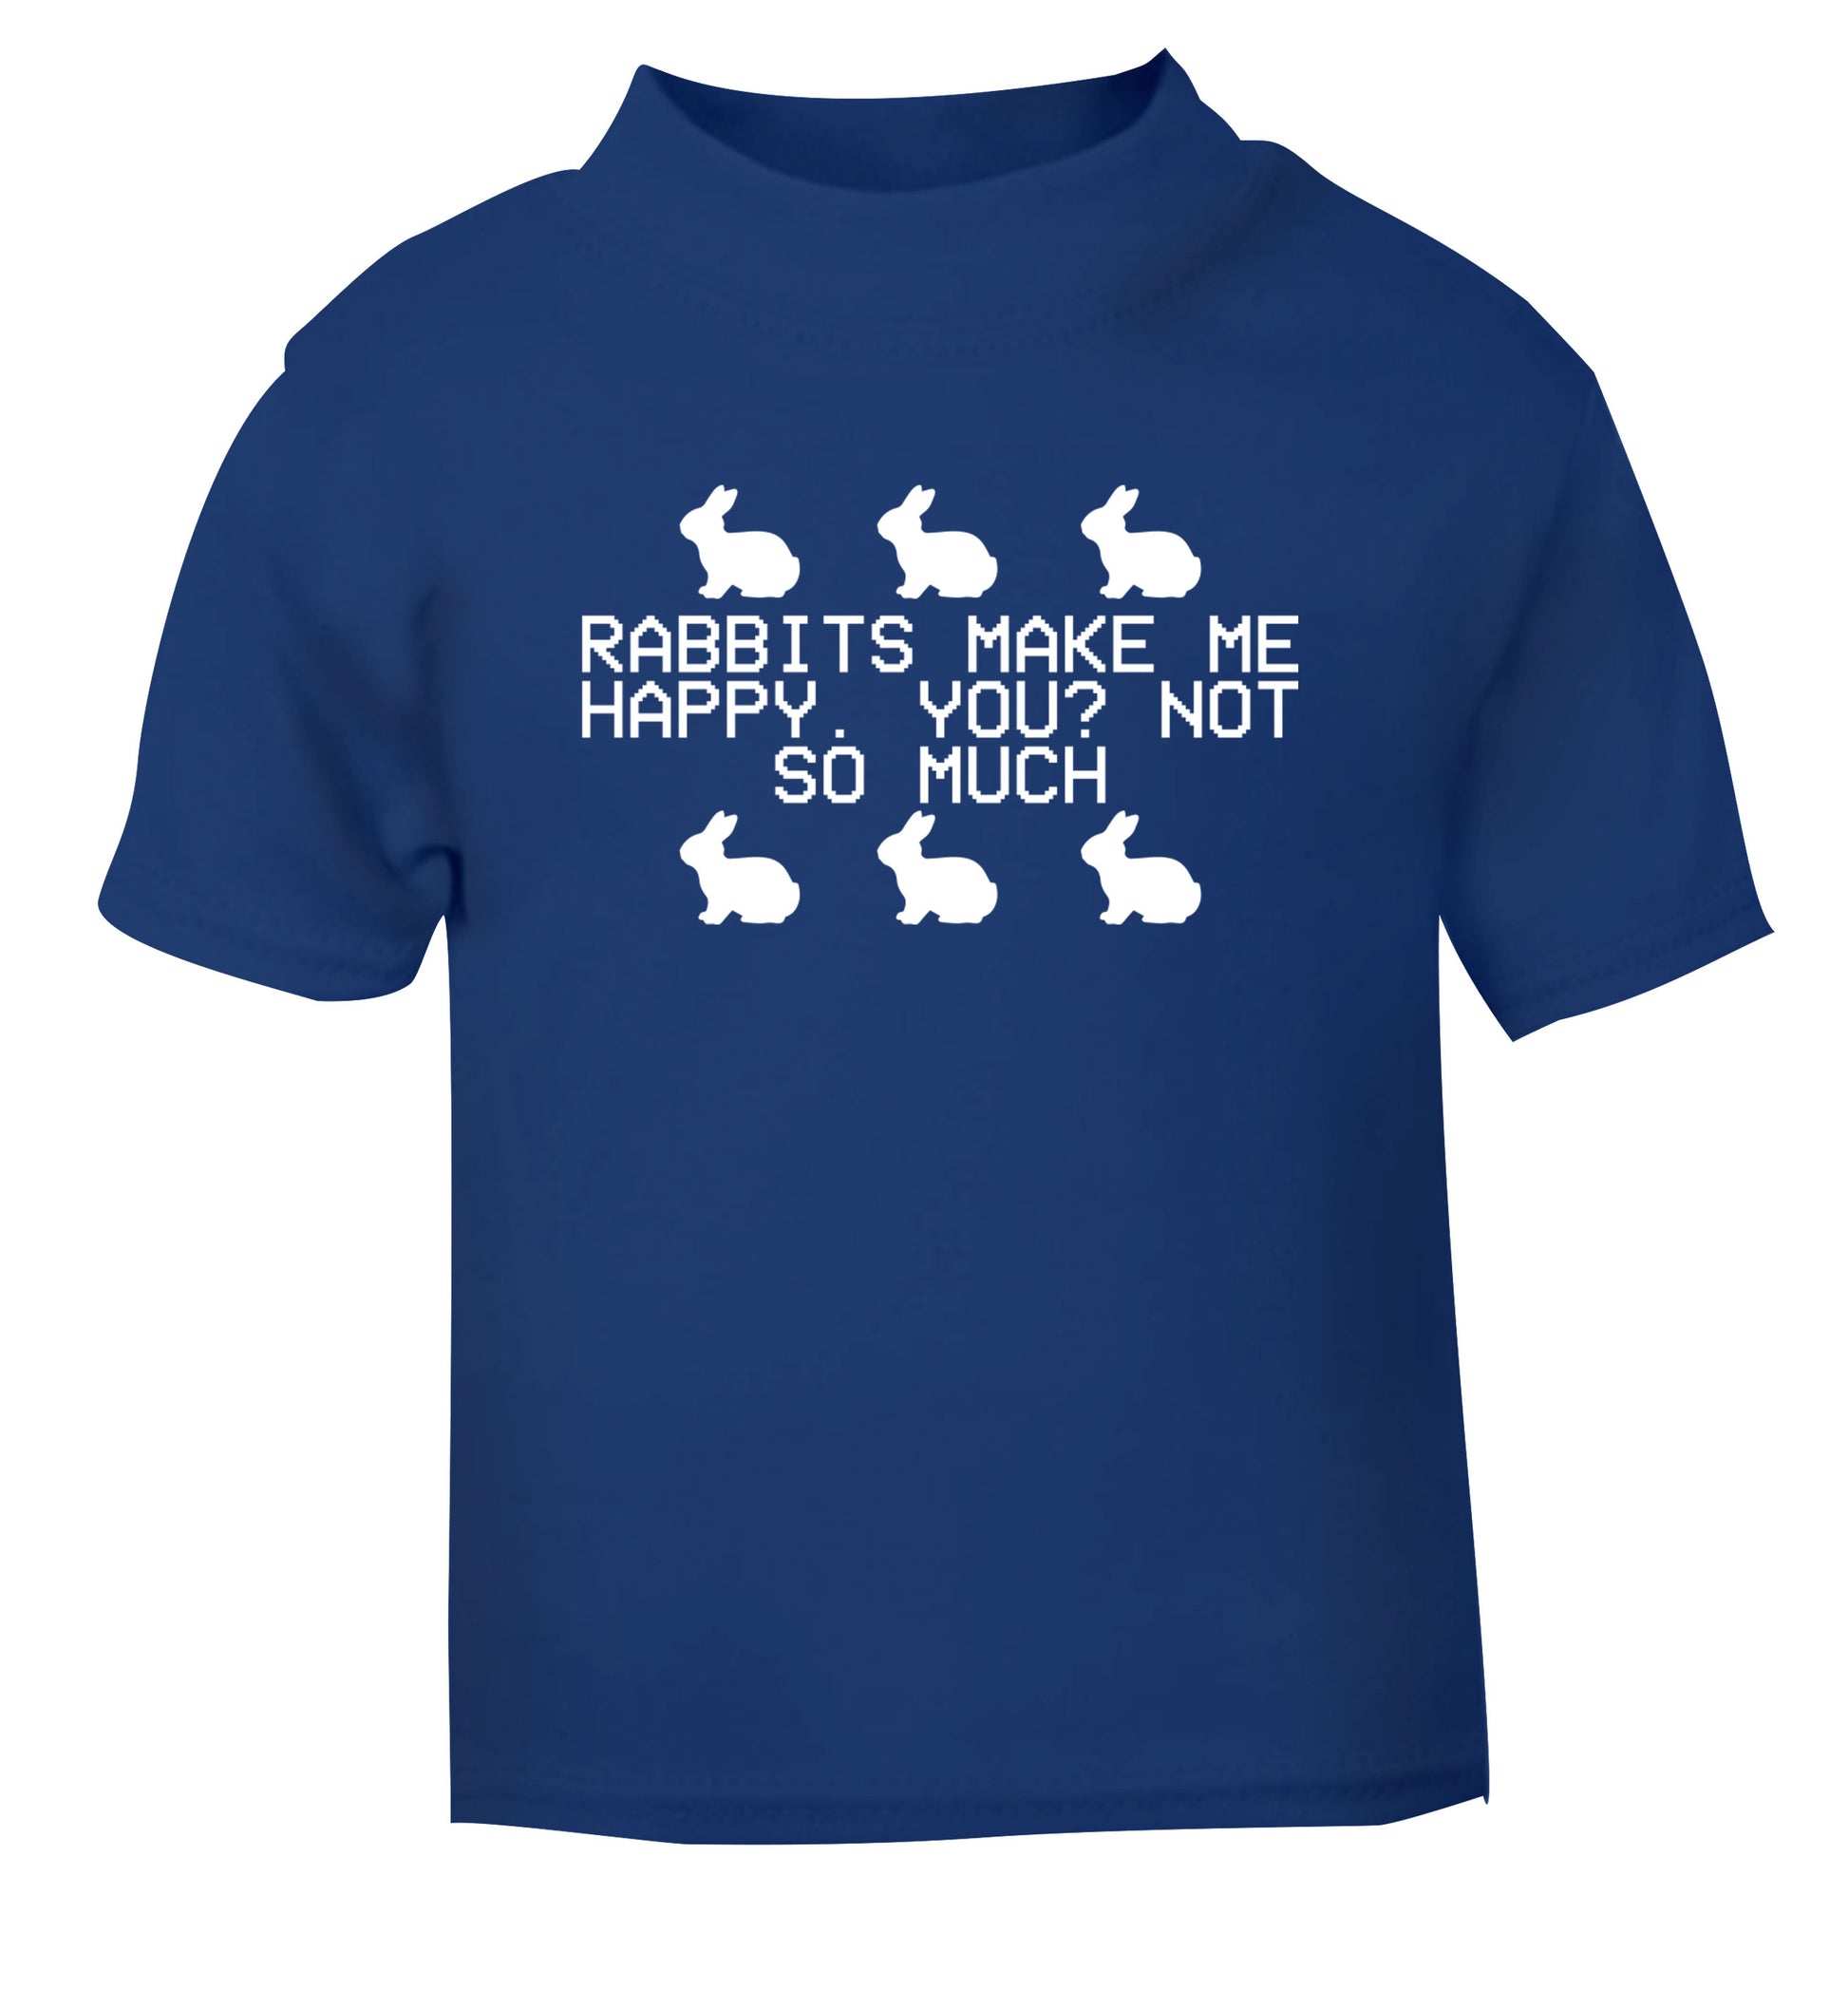 Rabbits make me happy, you not so much blue Baby Toddler Tshirt 2 Years